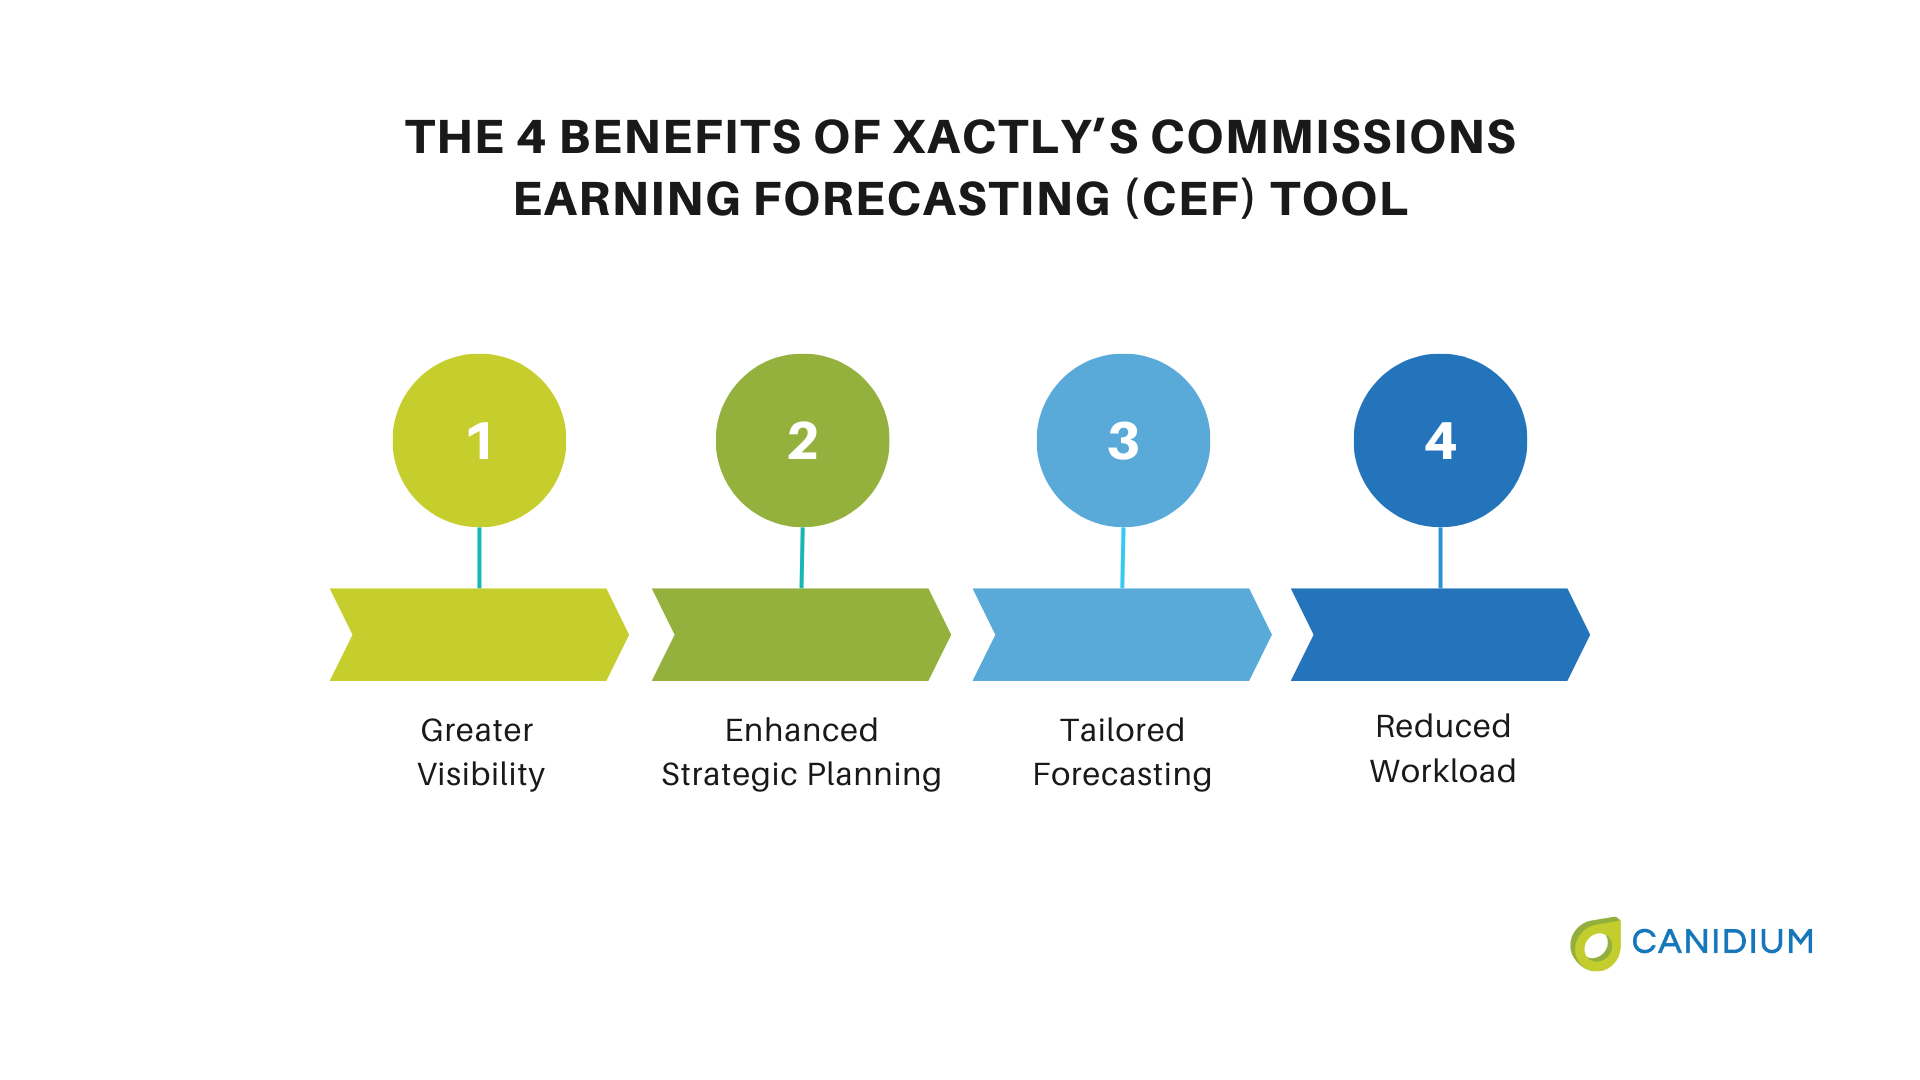 4 benefits of Xactly's commissions earning forecasting (CEF) tool